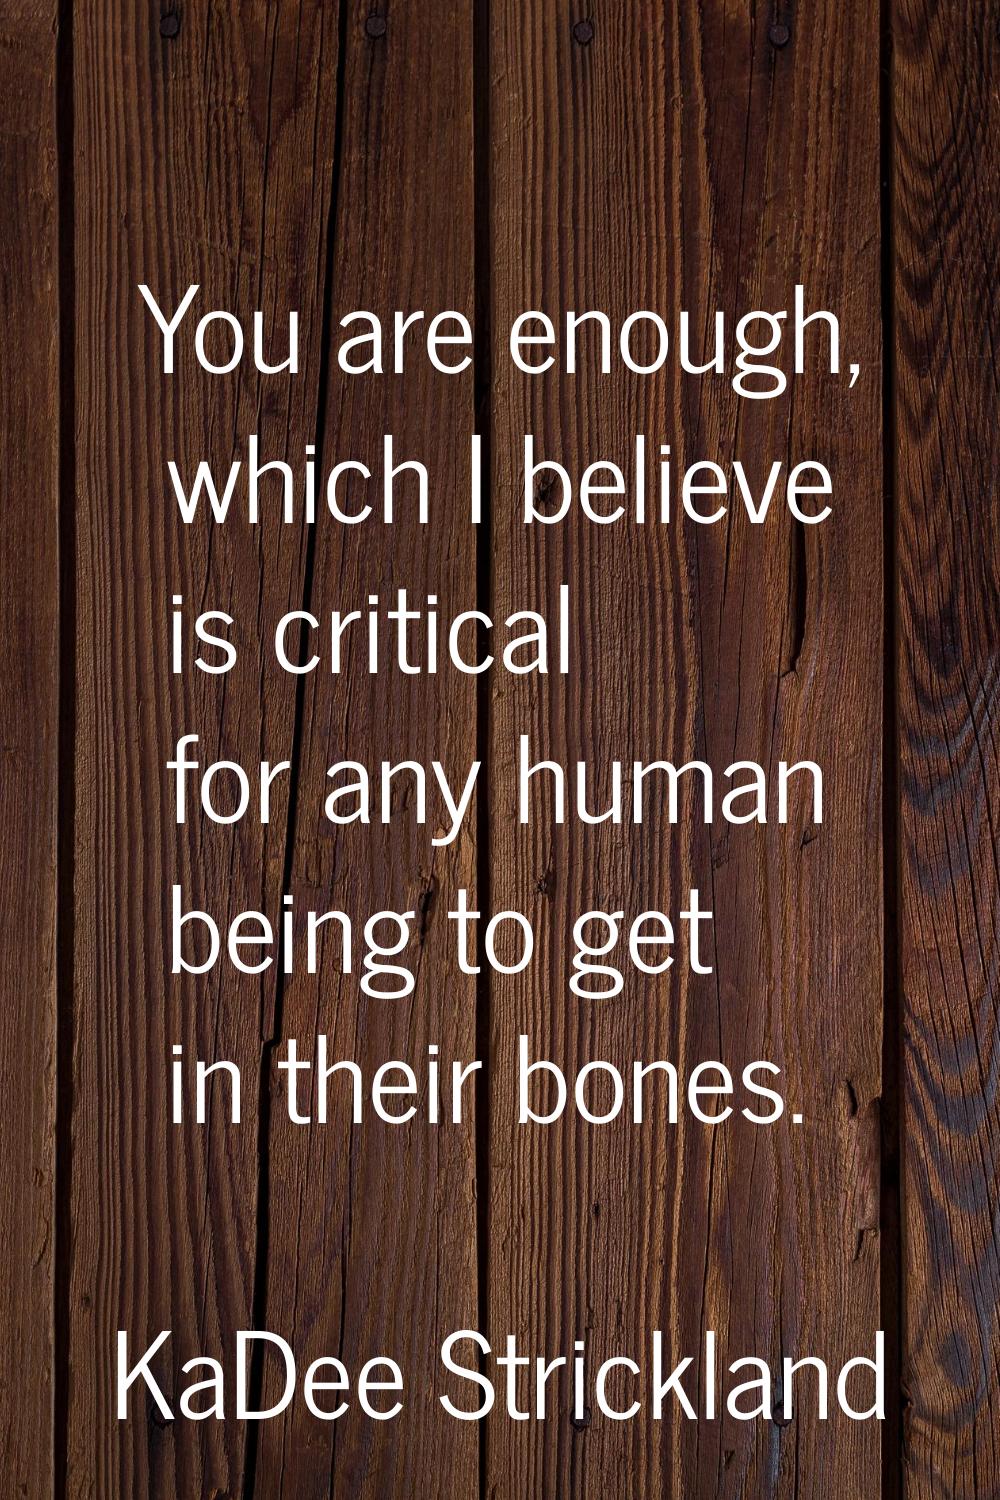 You are enough, which I believe is critical for any human being to get in their bones.